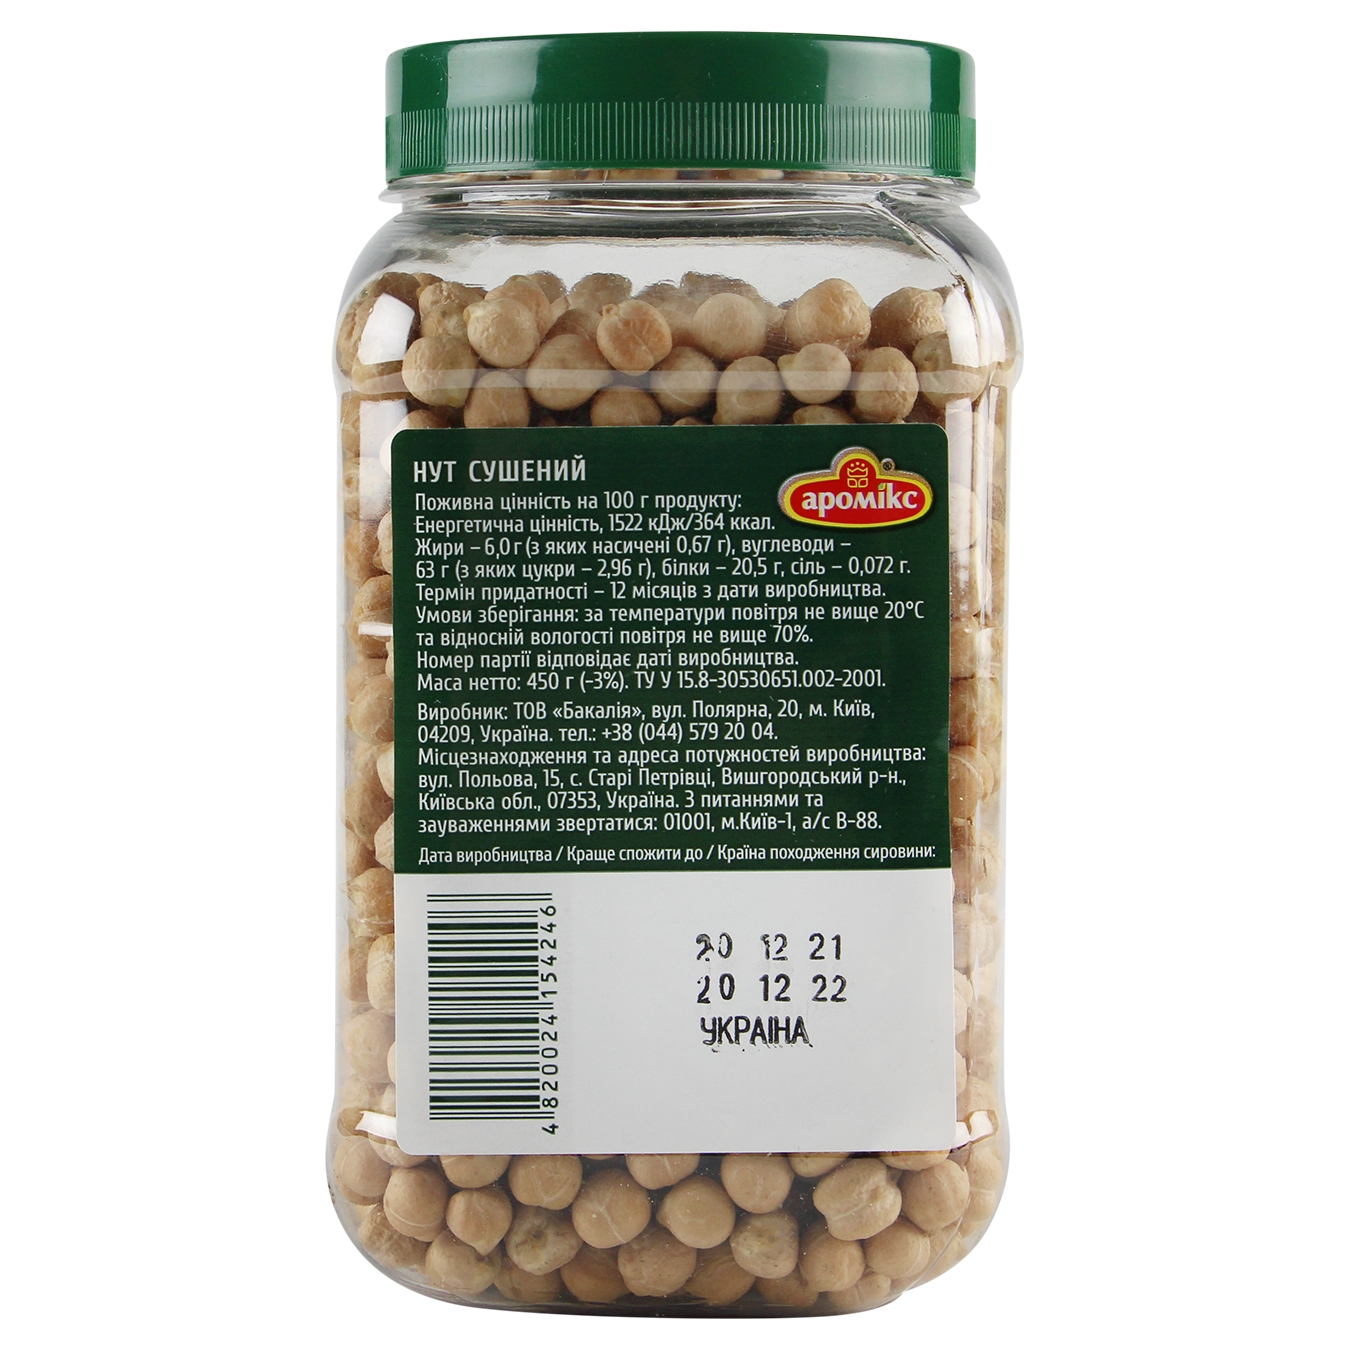 Dried chickpea Aromix 450g 2